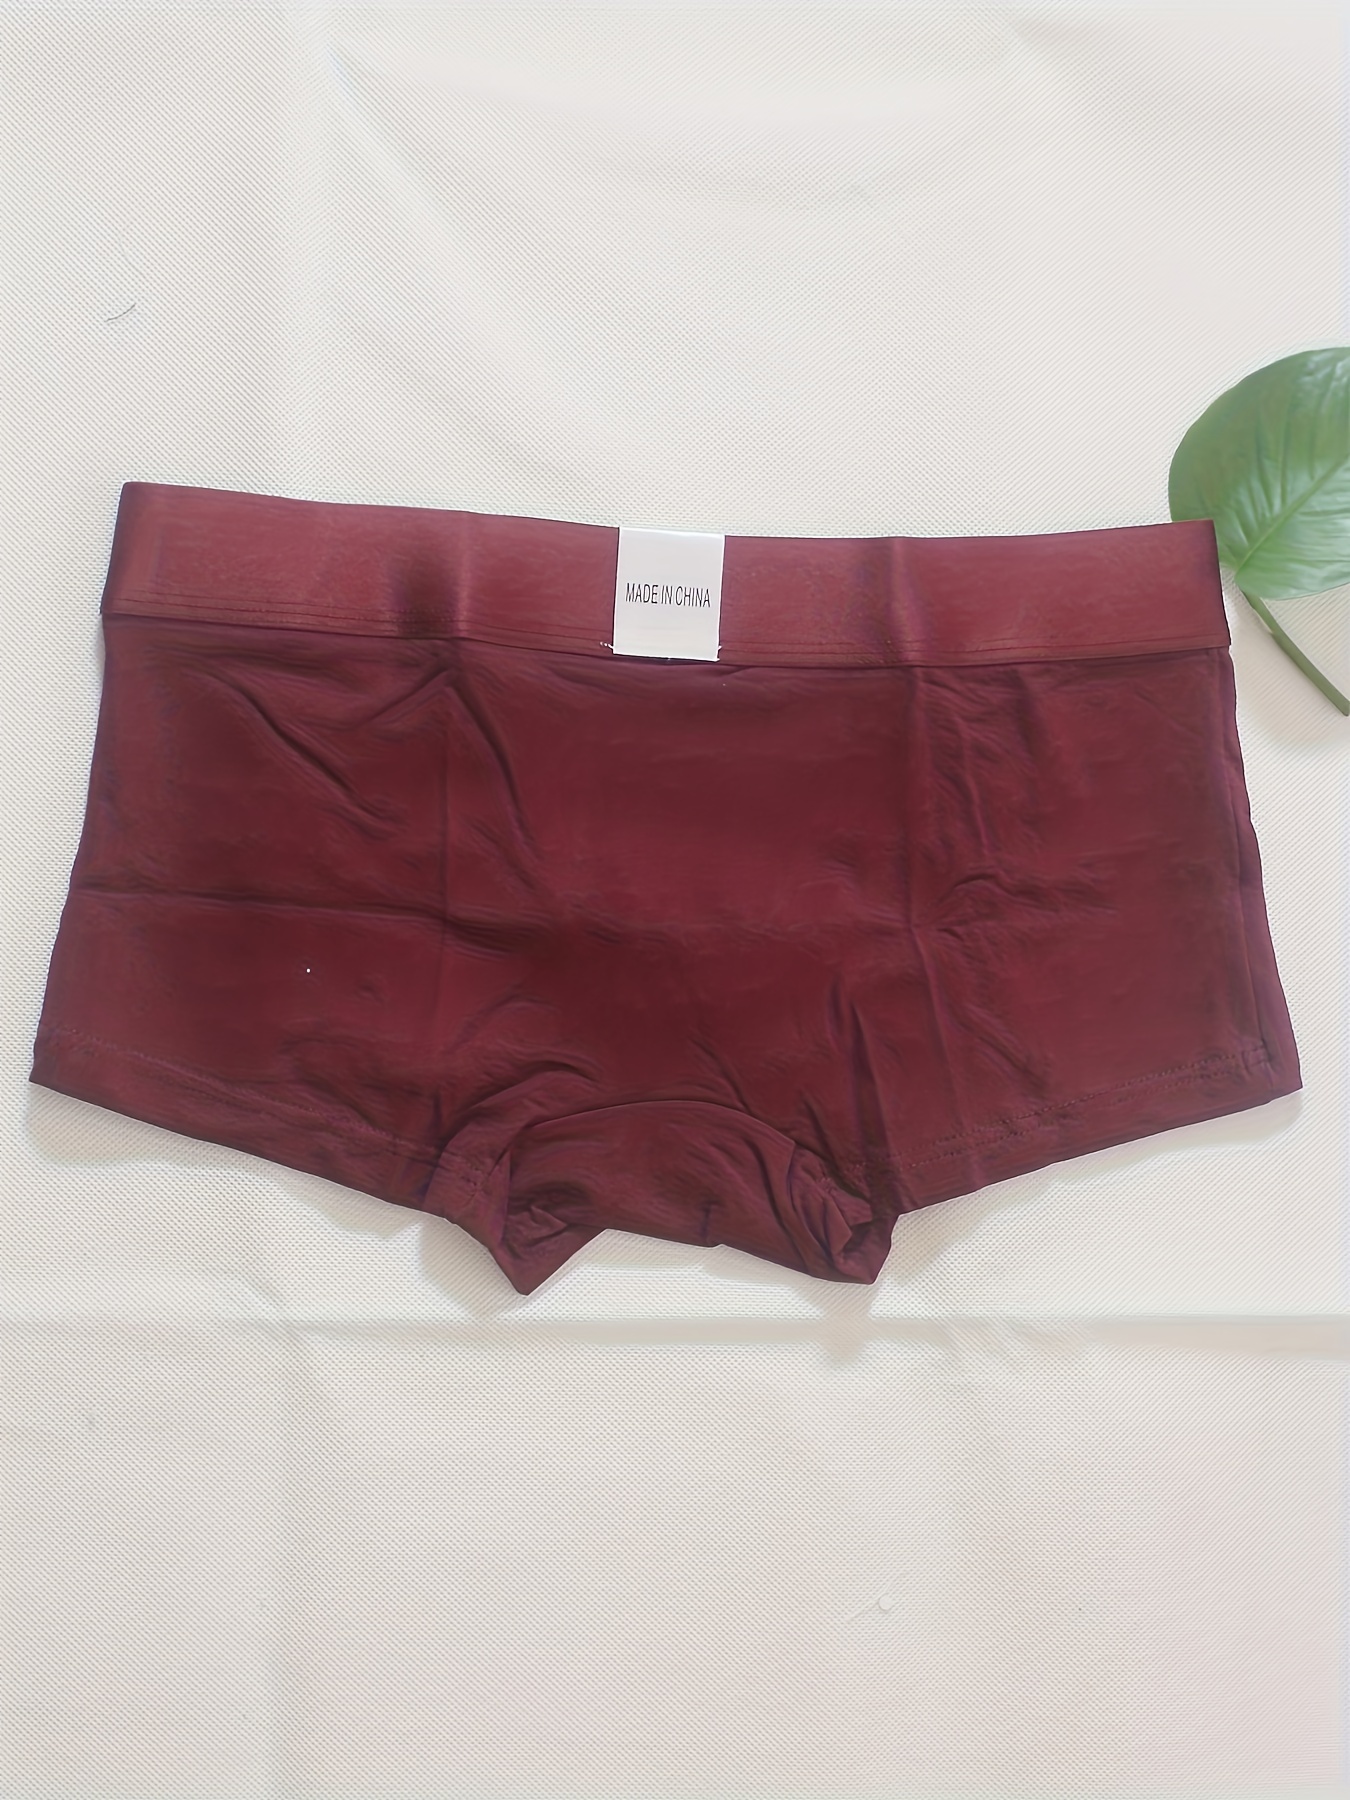 Wholesale Man Underwear With Cock Ring, Stylish Undergarments For Him 